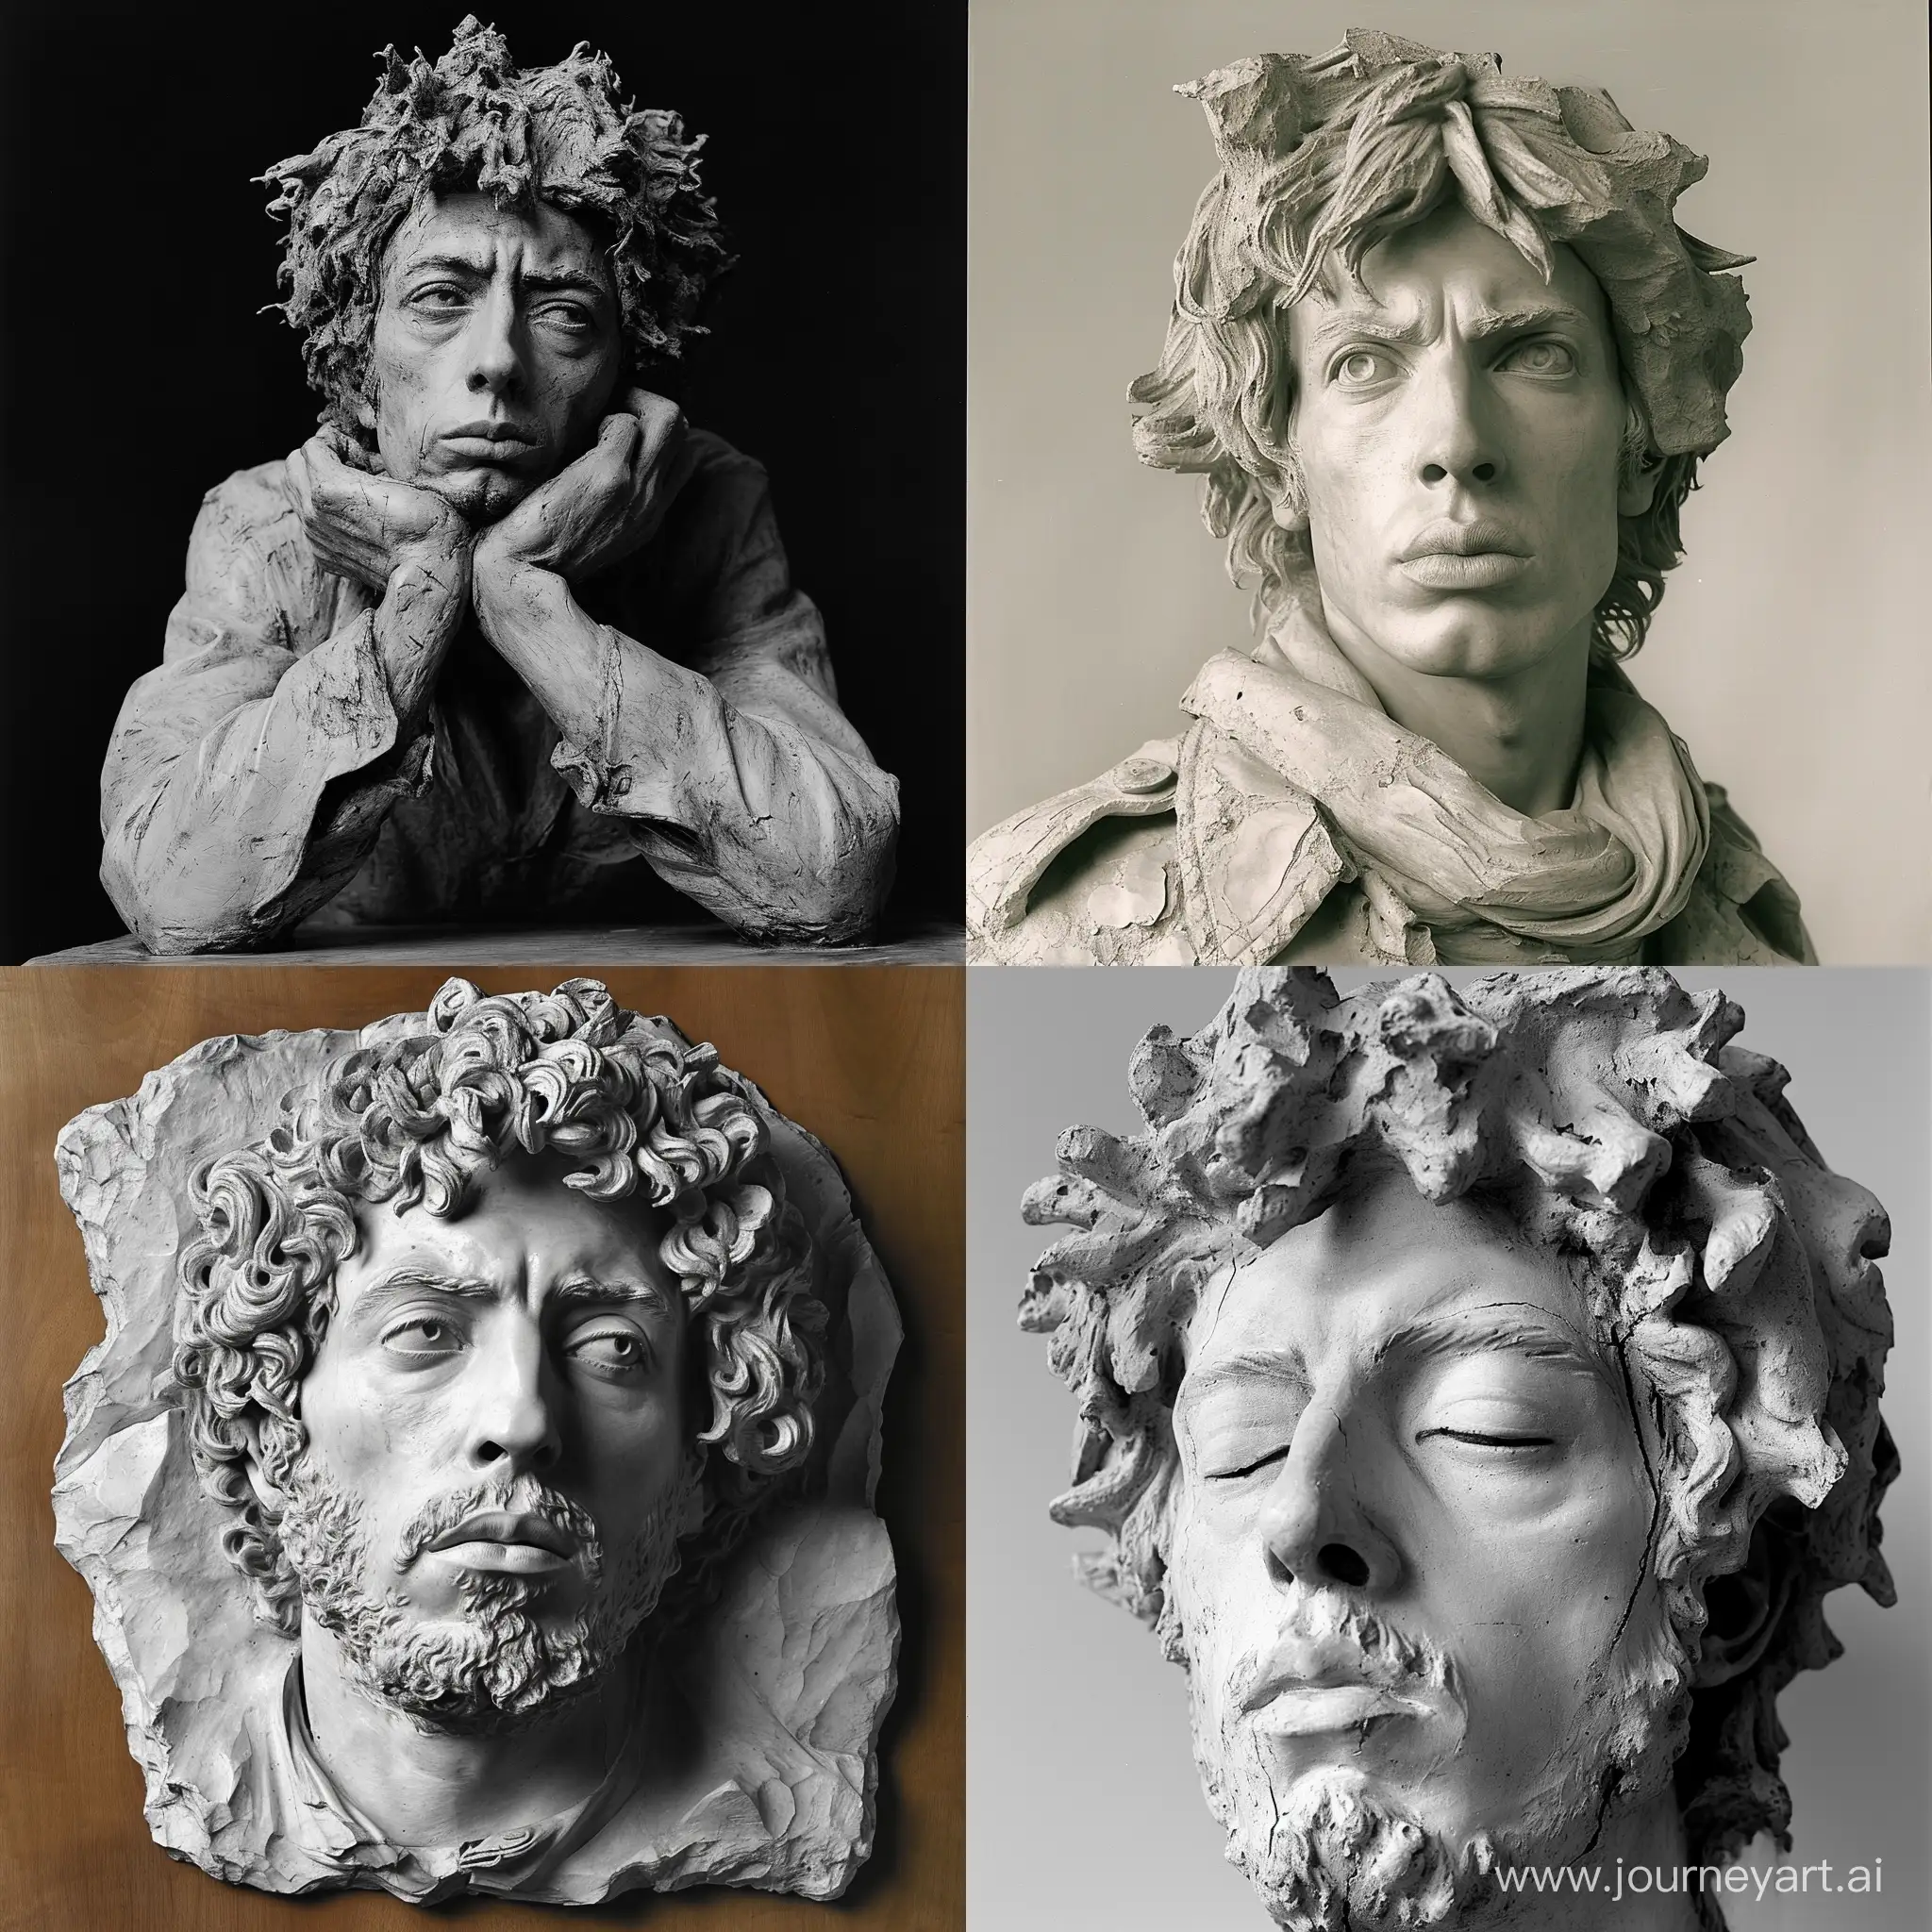 bob dylan in the 60s sculpted by Michelangelo